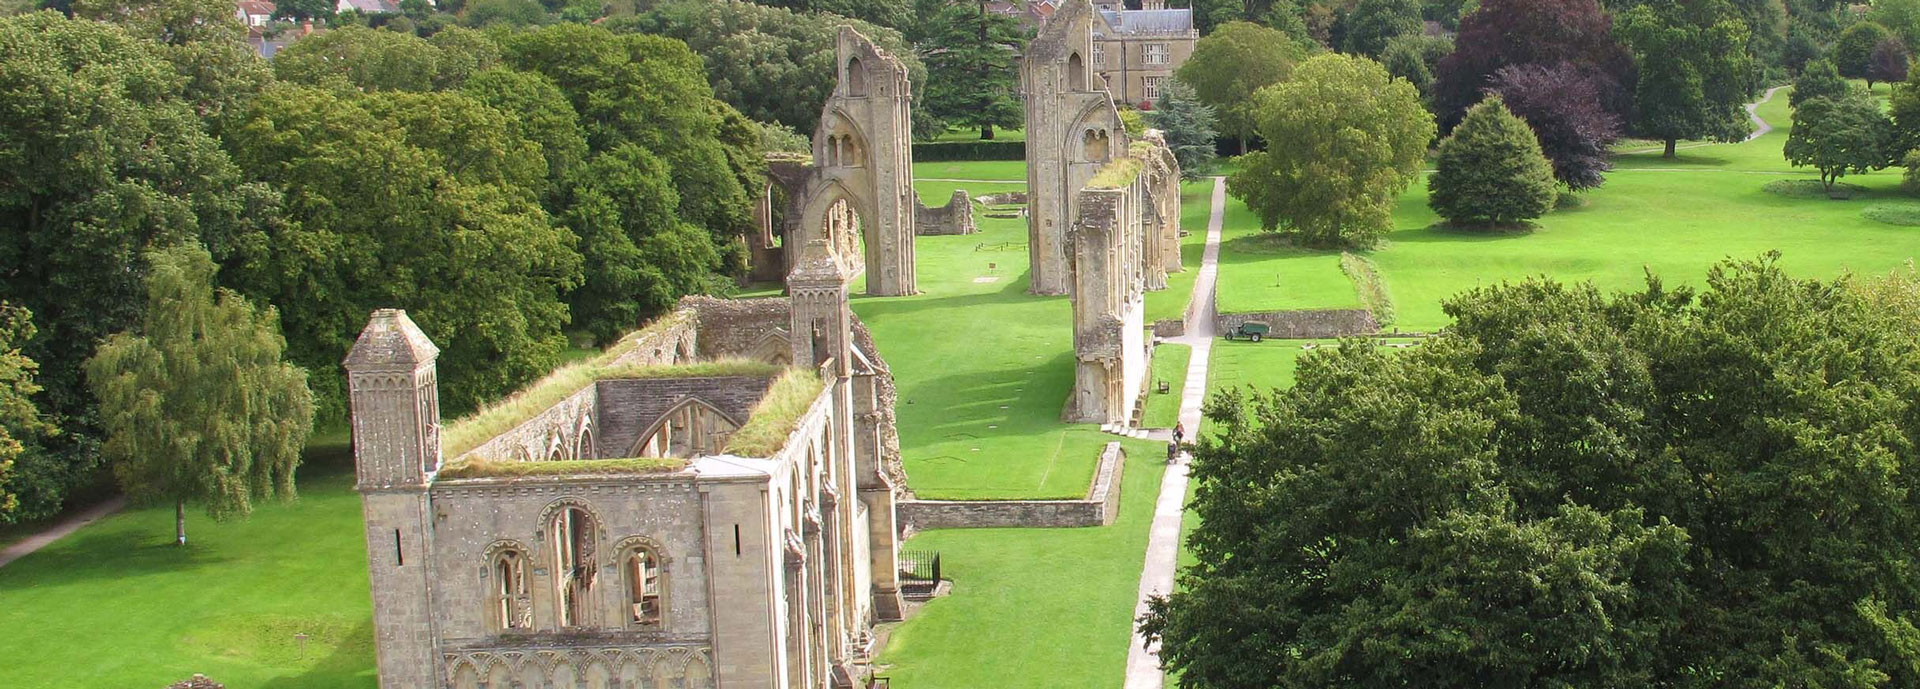 Immersive sacred heritage: challenges in storytelling at Glastonbury Abbey